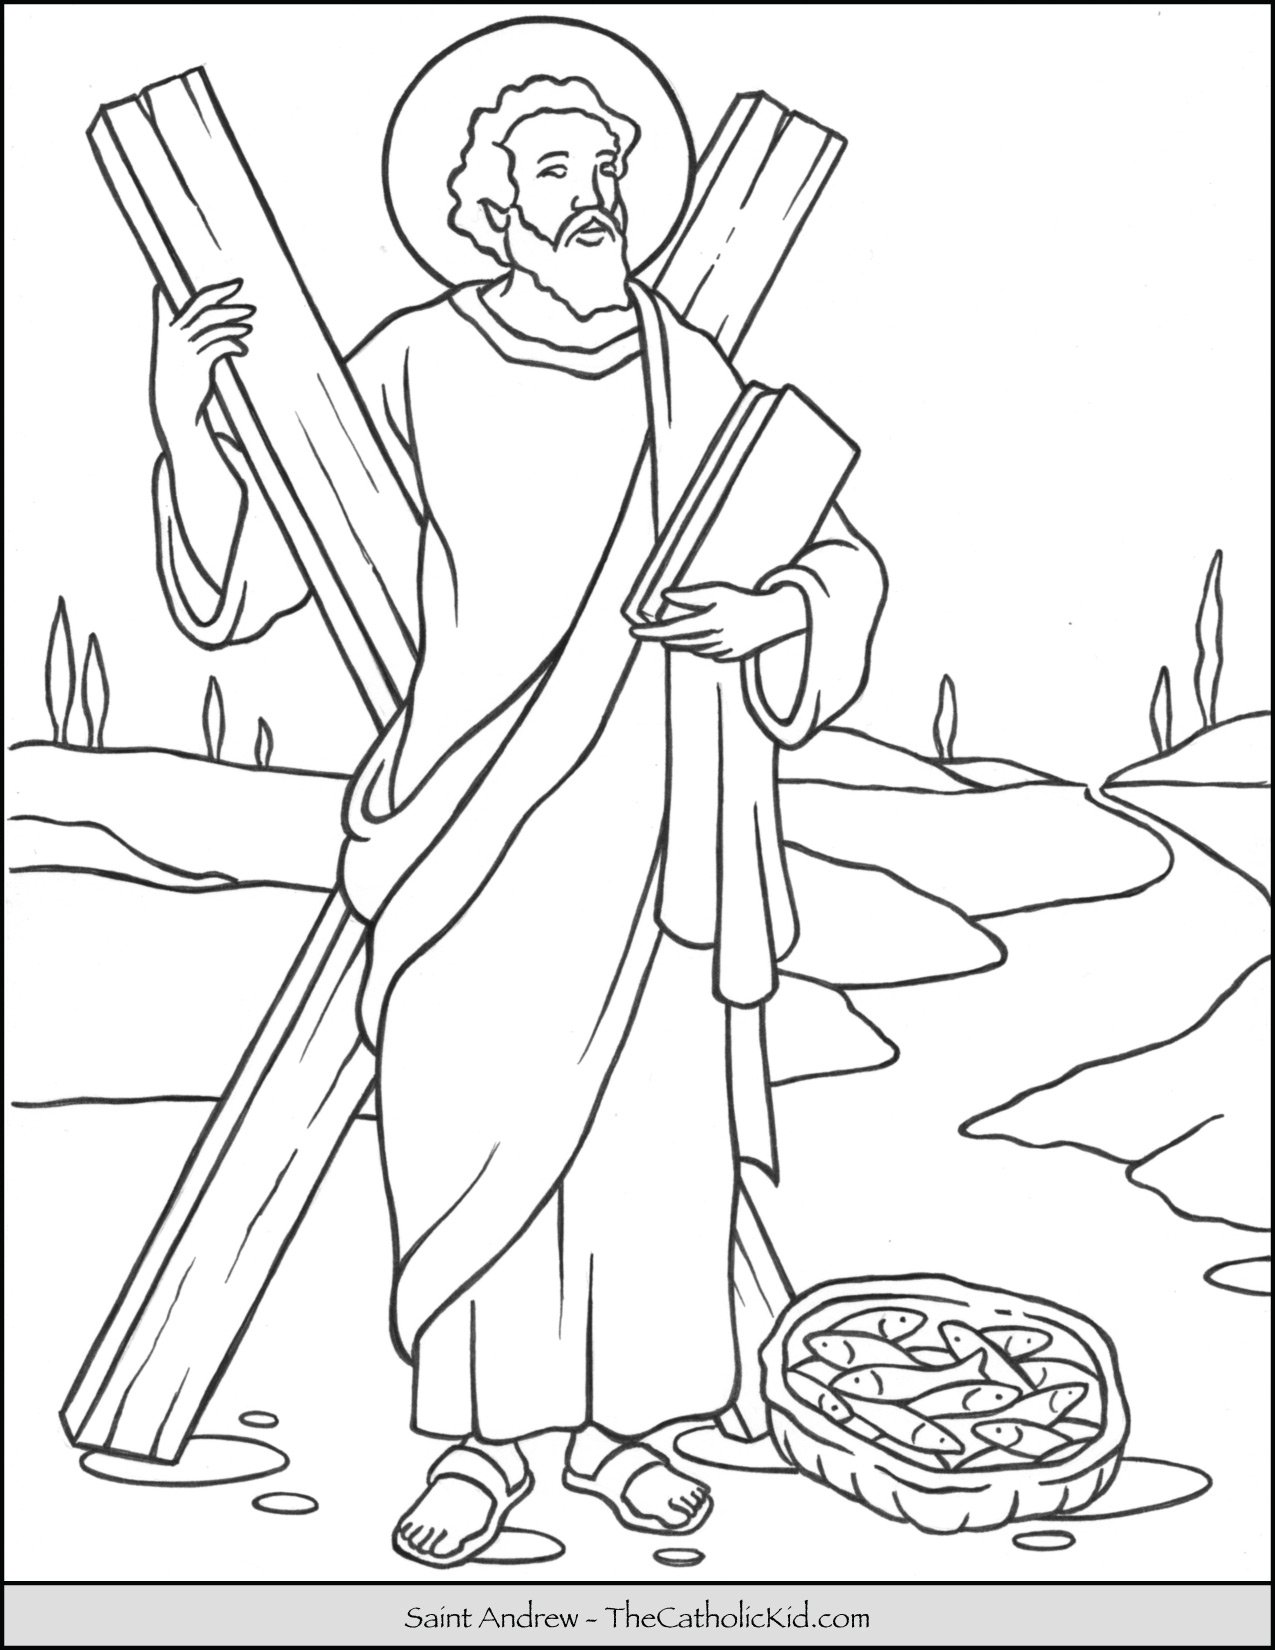 Saint andrew coloring page